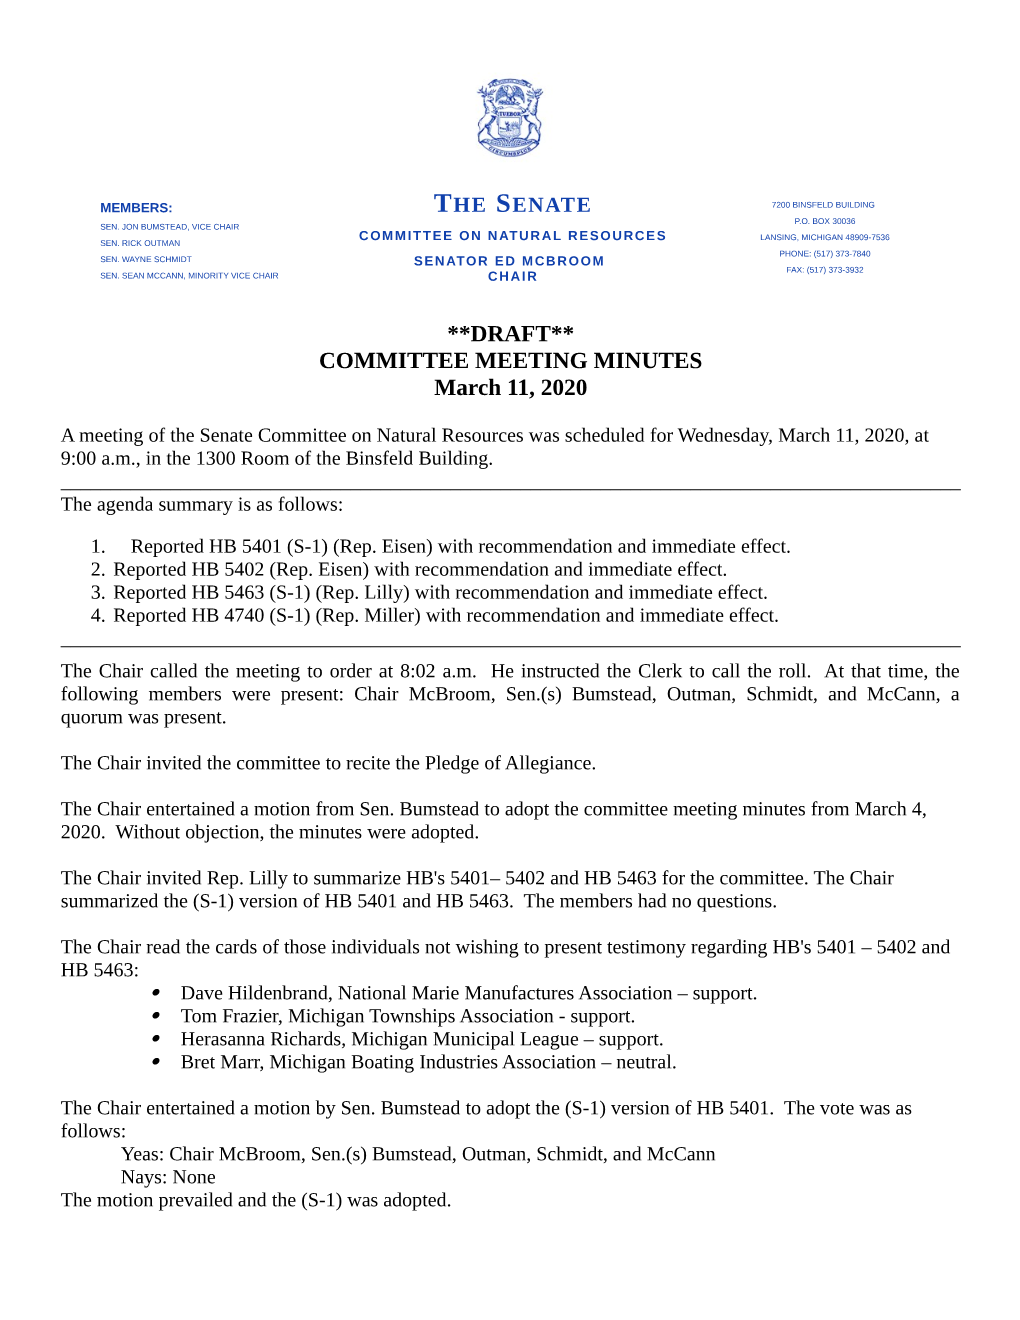 **DRAFT** COMMITTEE MEETING MINUTES March 11, 2020